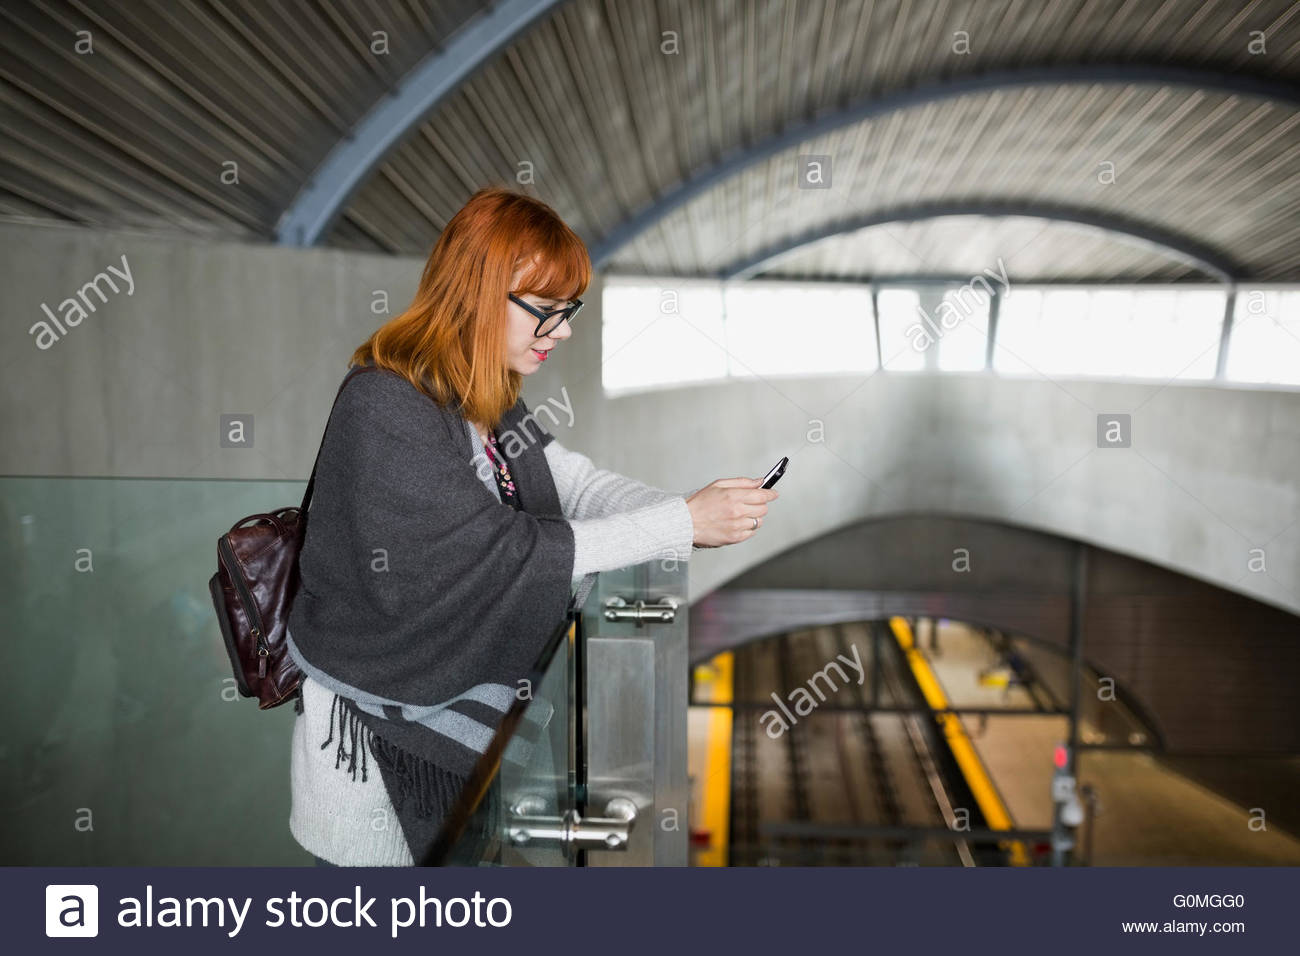 Woman texting with cell phone at train station Stock Photo